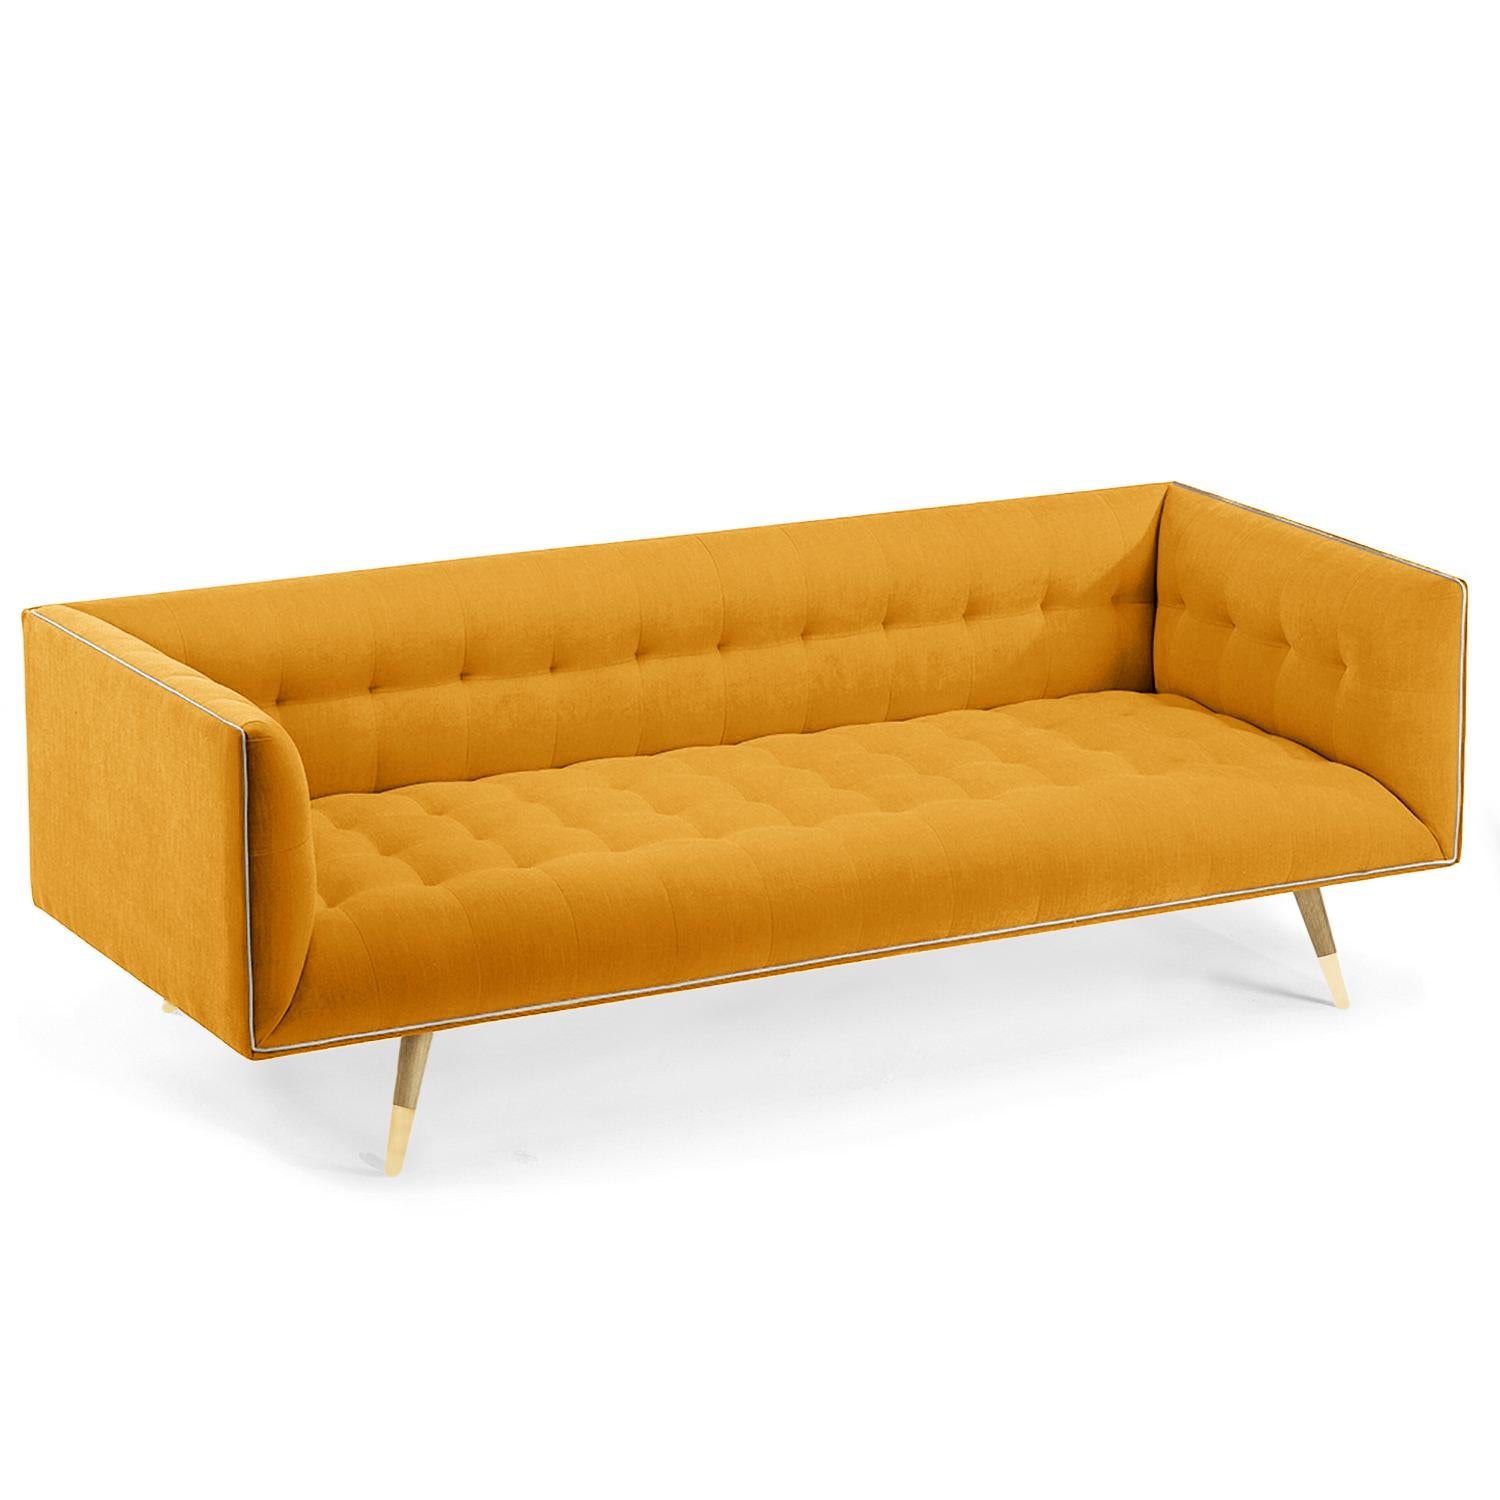 Portuguese Dust Sofa, Large with Natural Light Oak - Polished Brass For Sale